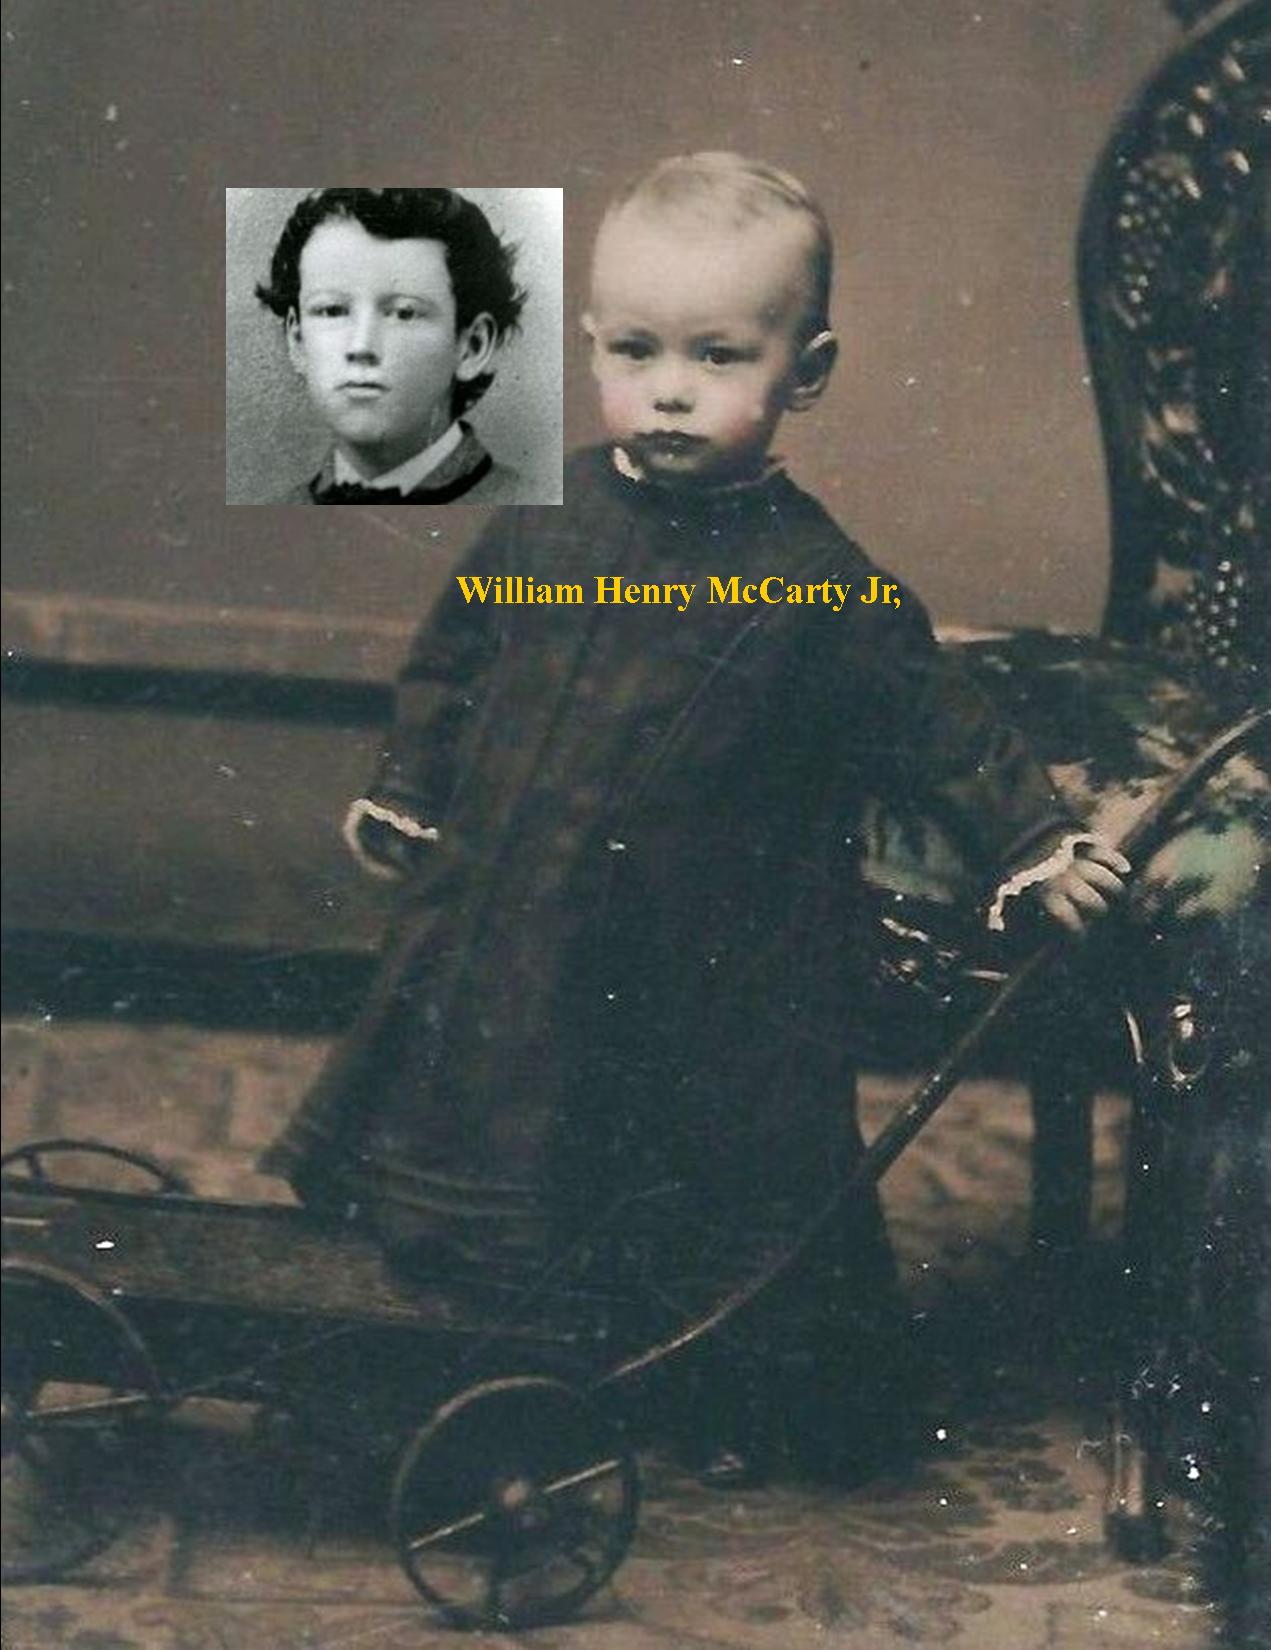 Wm H McCarty baby photo / RJ Pastore Collection